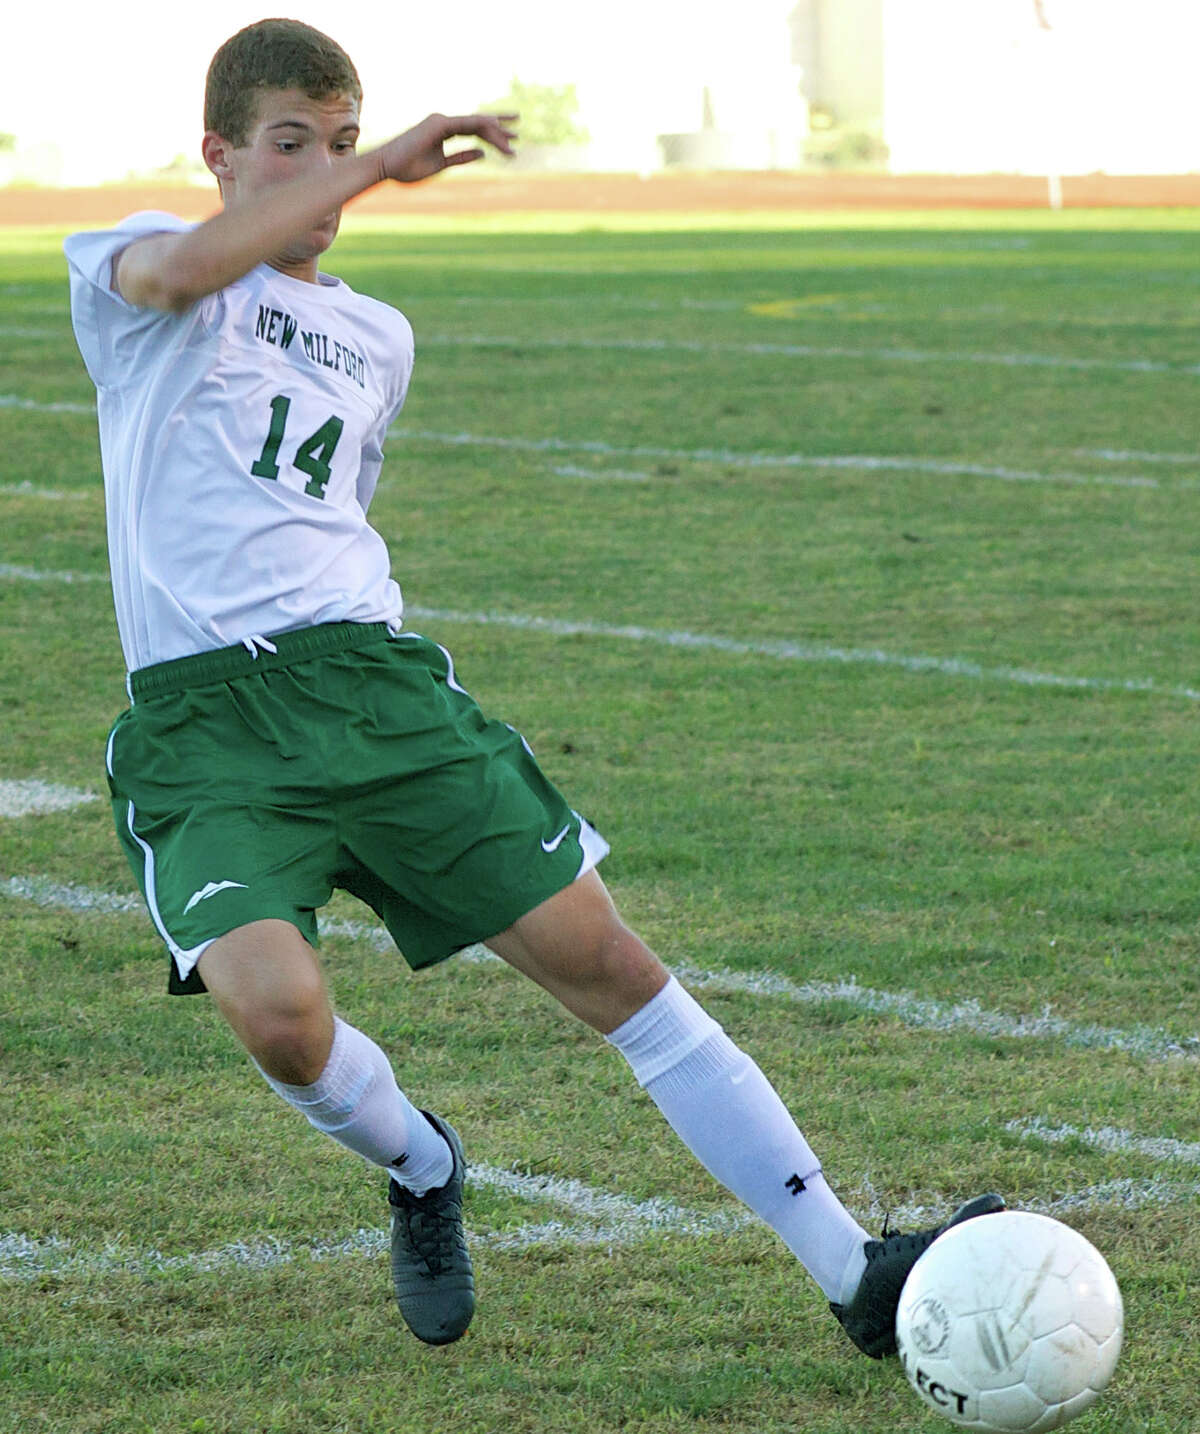 The Green Wave's Adrian Lekaj found the range for two goals during New Milford High School boys' soccer's 3-1 victory over Stratford, Sept. 23, 2013 at NMHS.